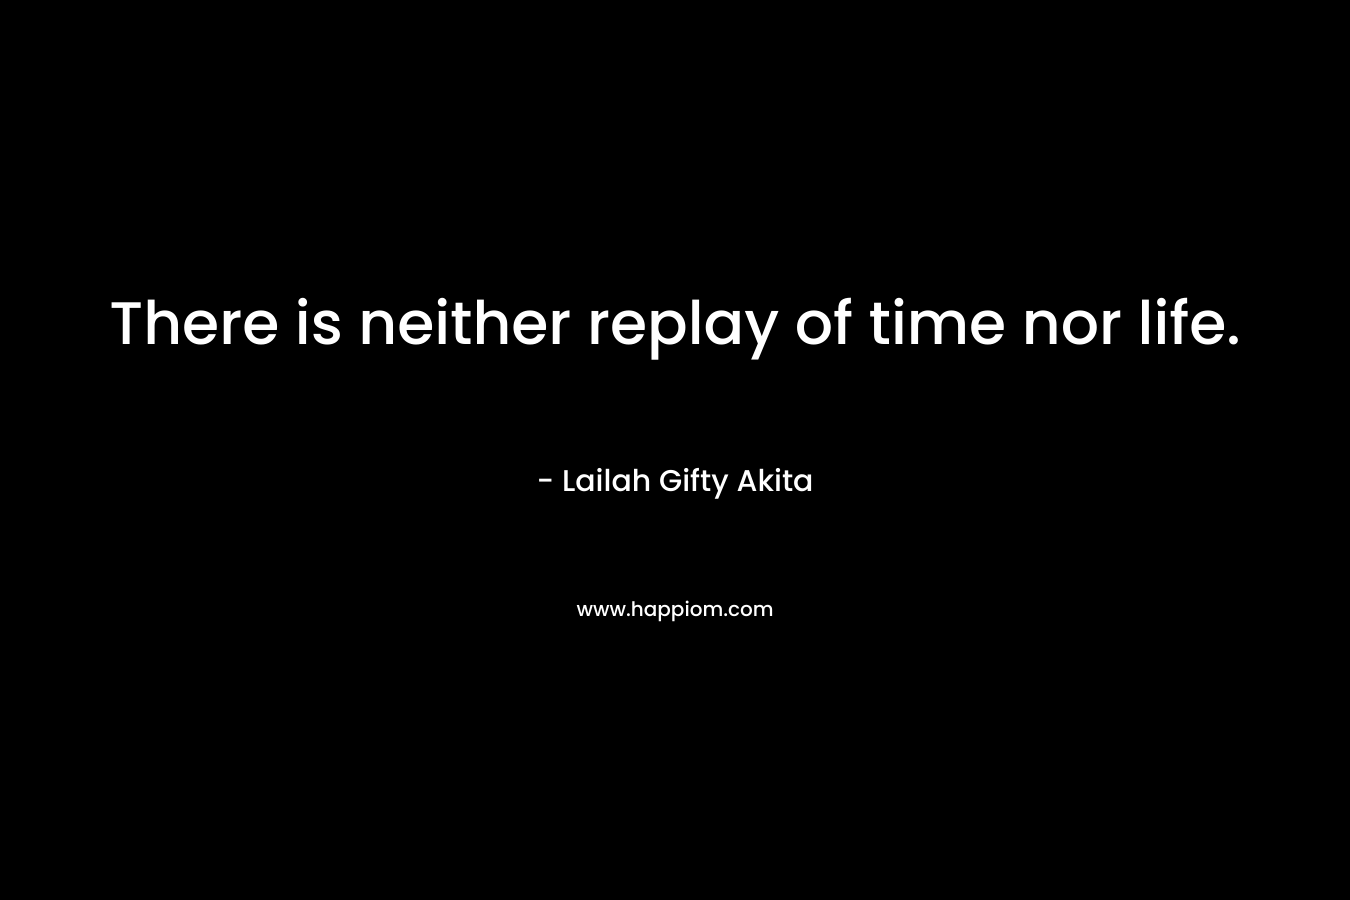 There is neither replay of time nor life.